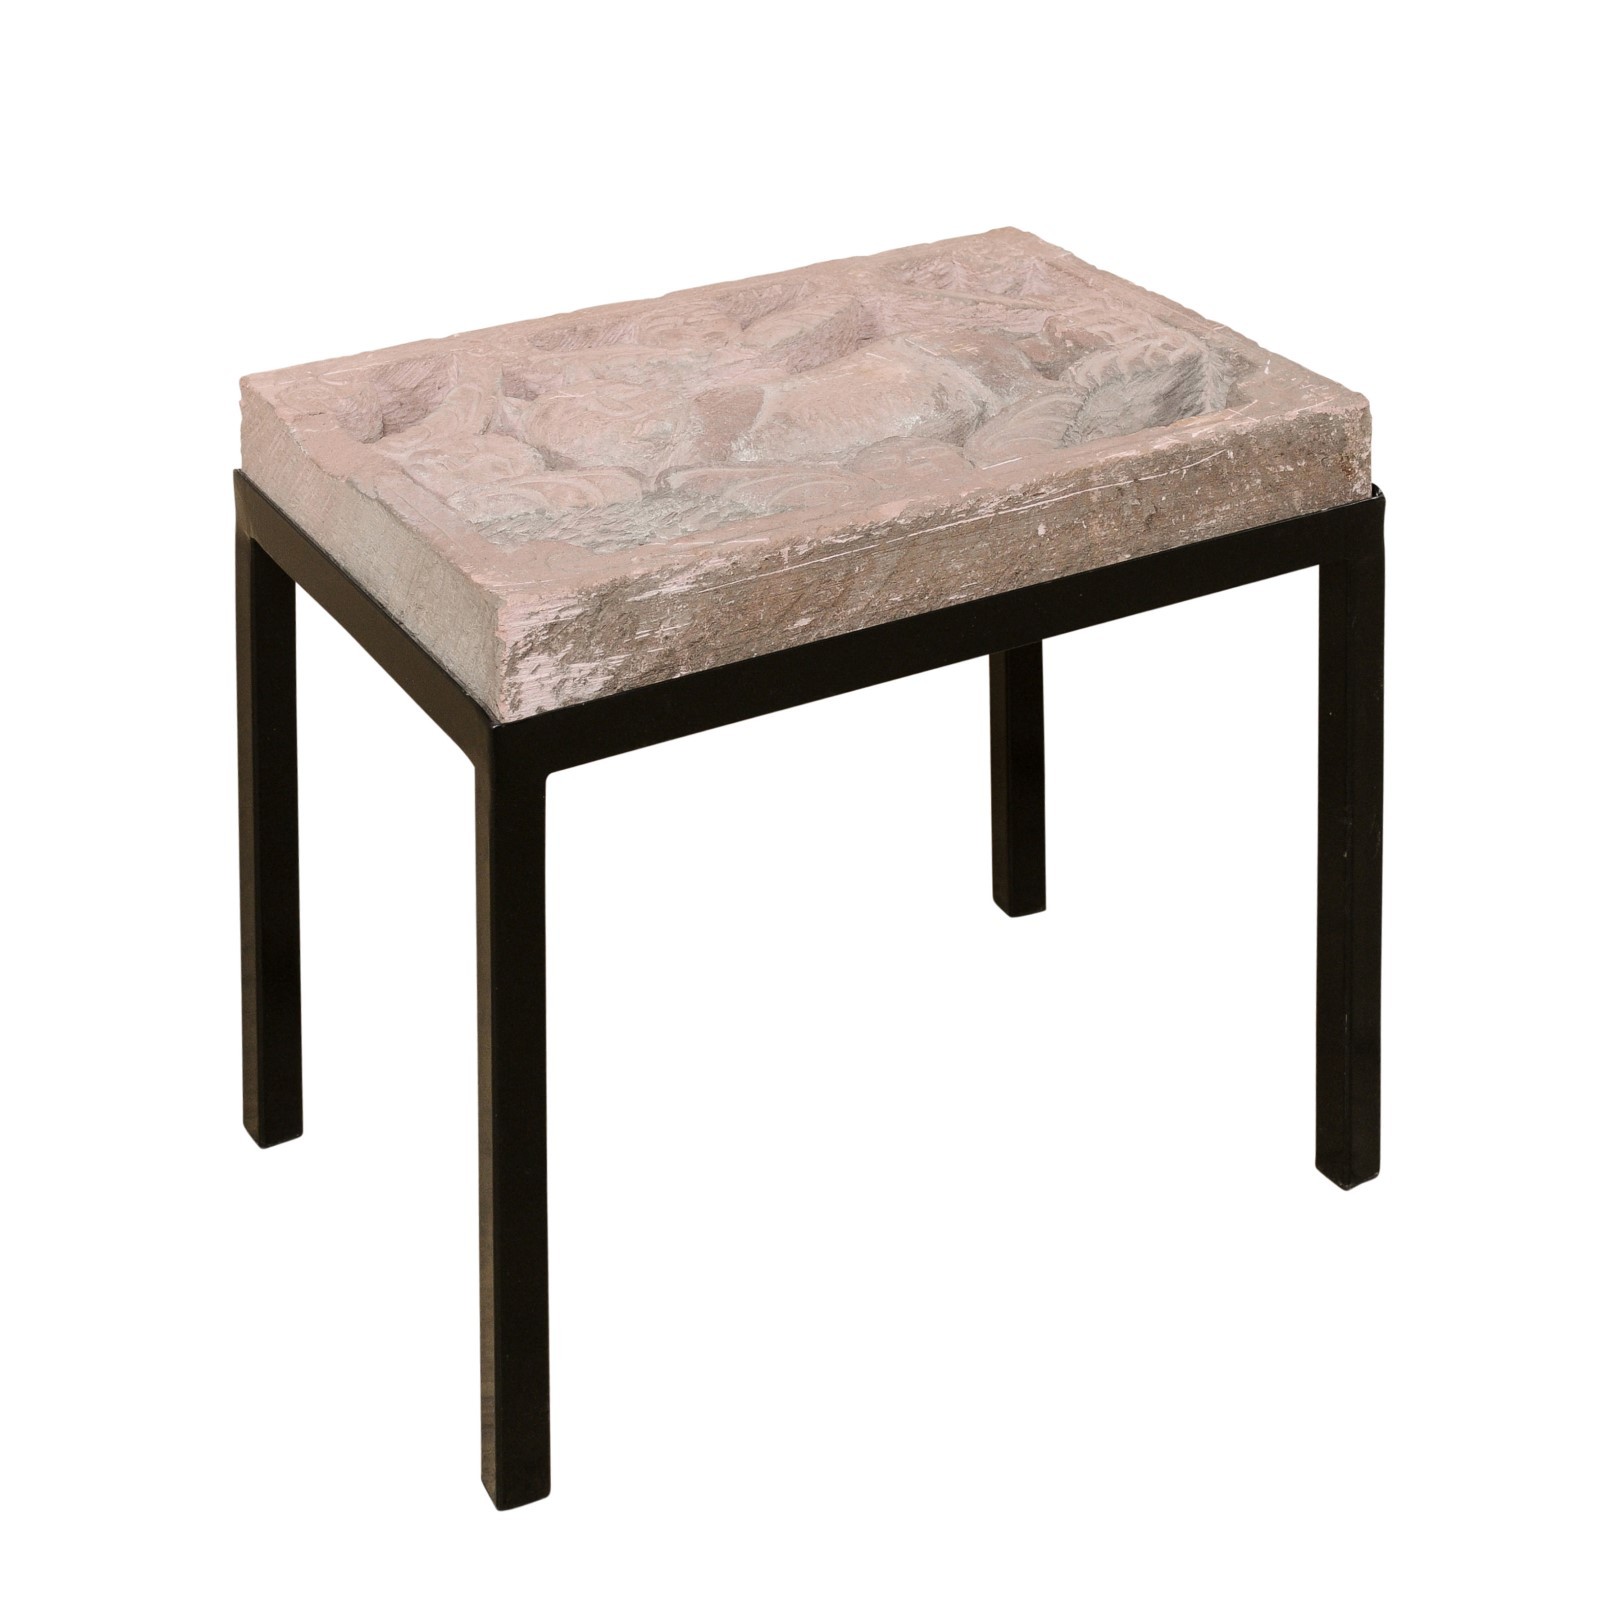 Playful "Gato" Carved-Stone Top Side Table